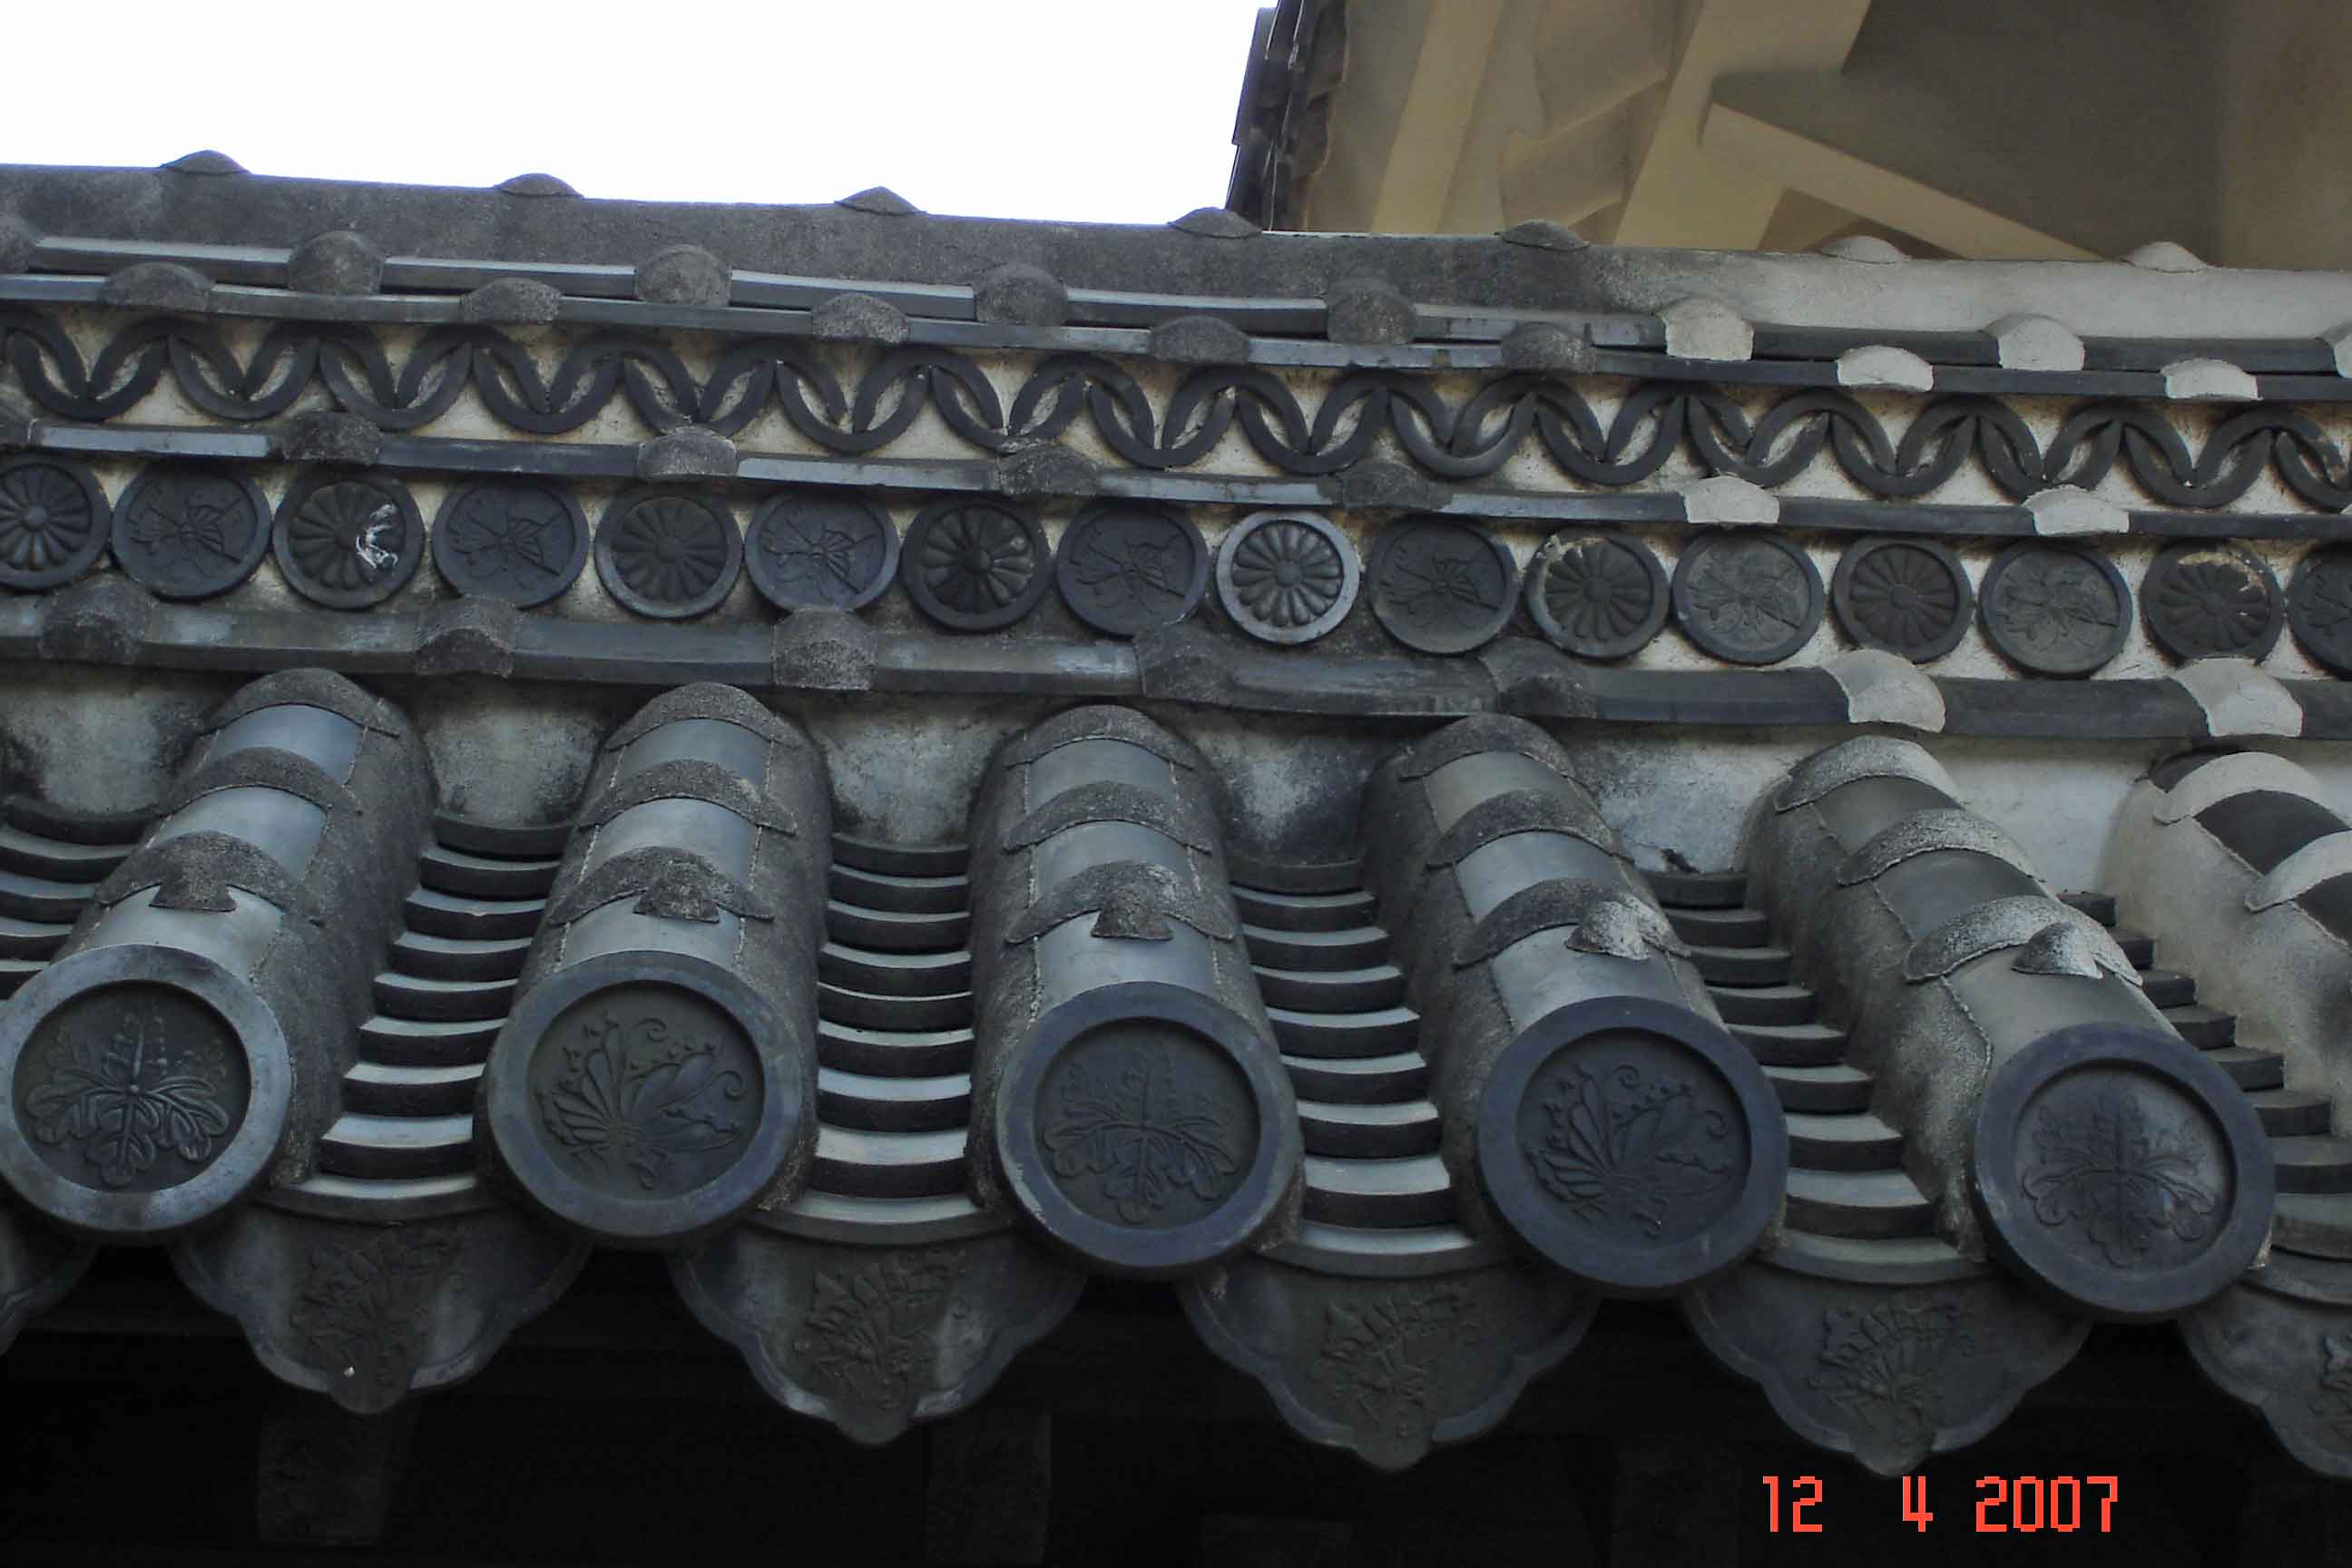 Roof gable with circle tiles of the family crest Himeji Castle